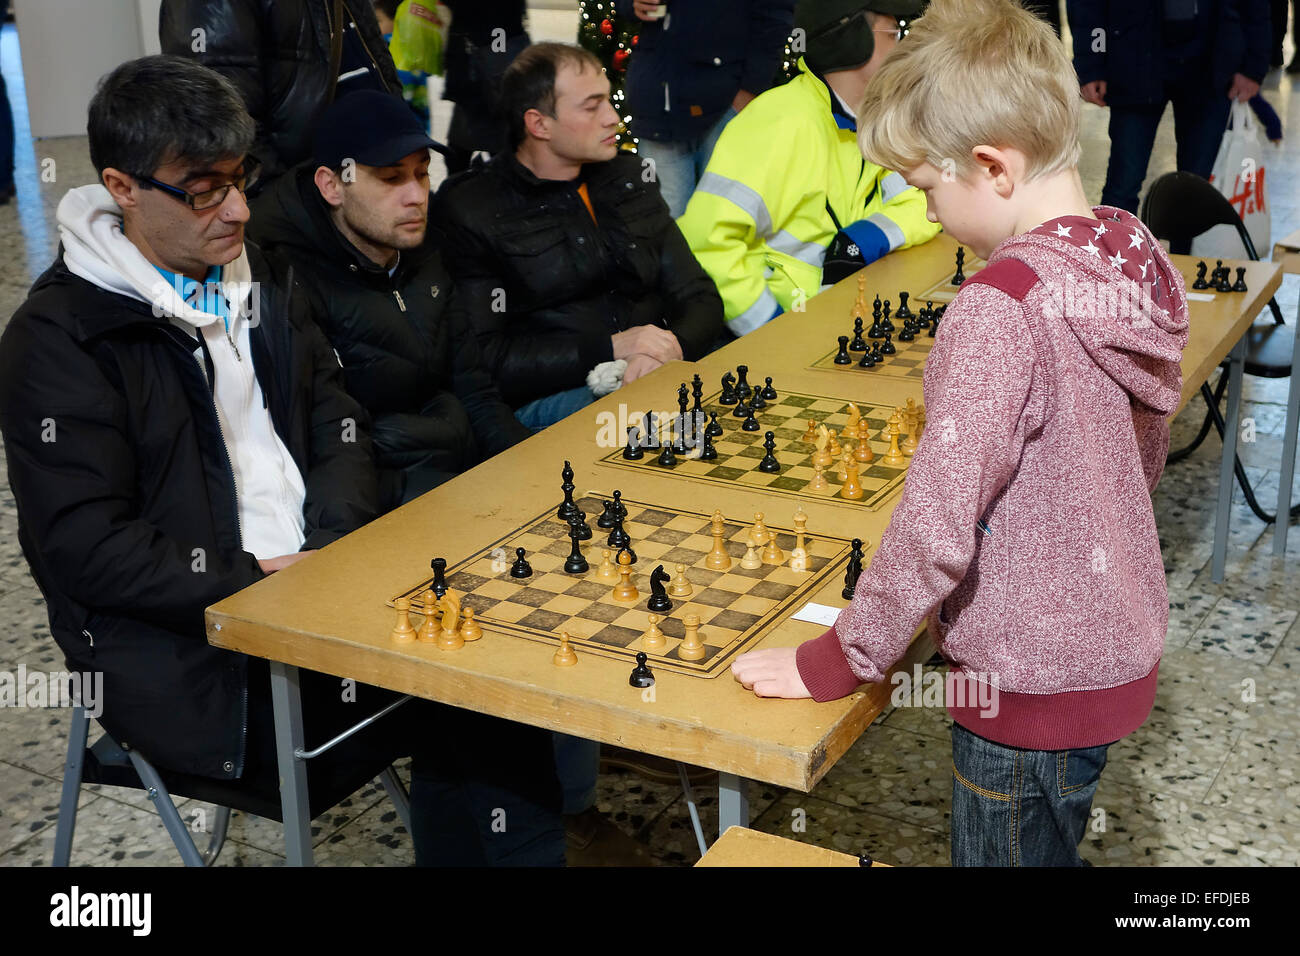 10 years old boy plays simultaneous chess game with 4 adult participants .  Nordstan, Göteborg,  Gothenburg, Sweden Stock Photo